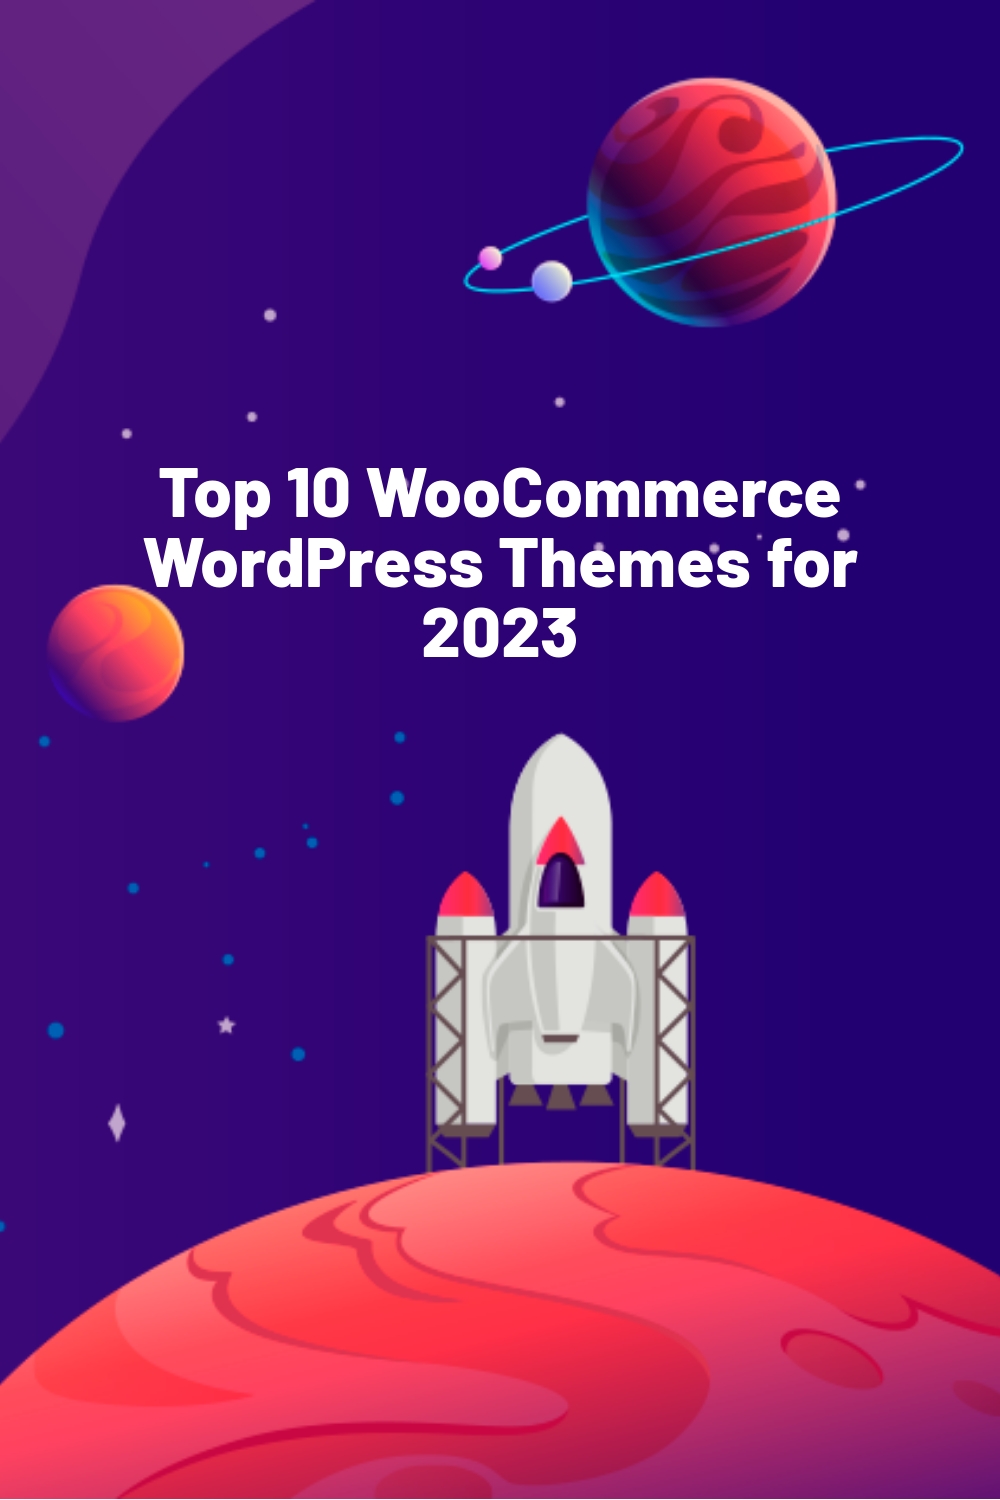 Top 10 WooCommerce WordPress Themes for 2023